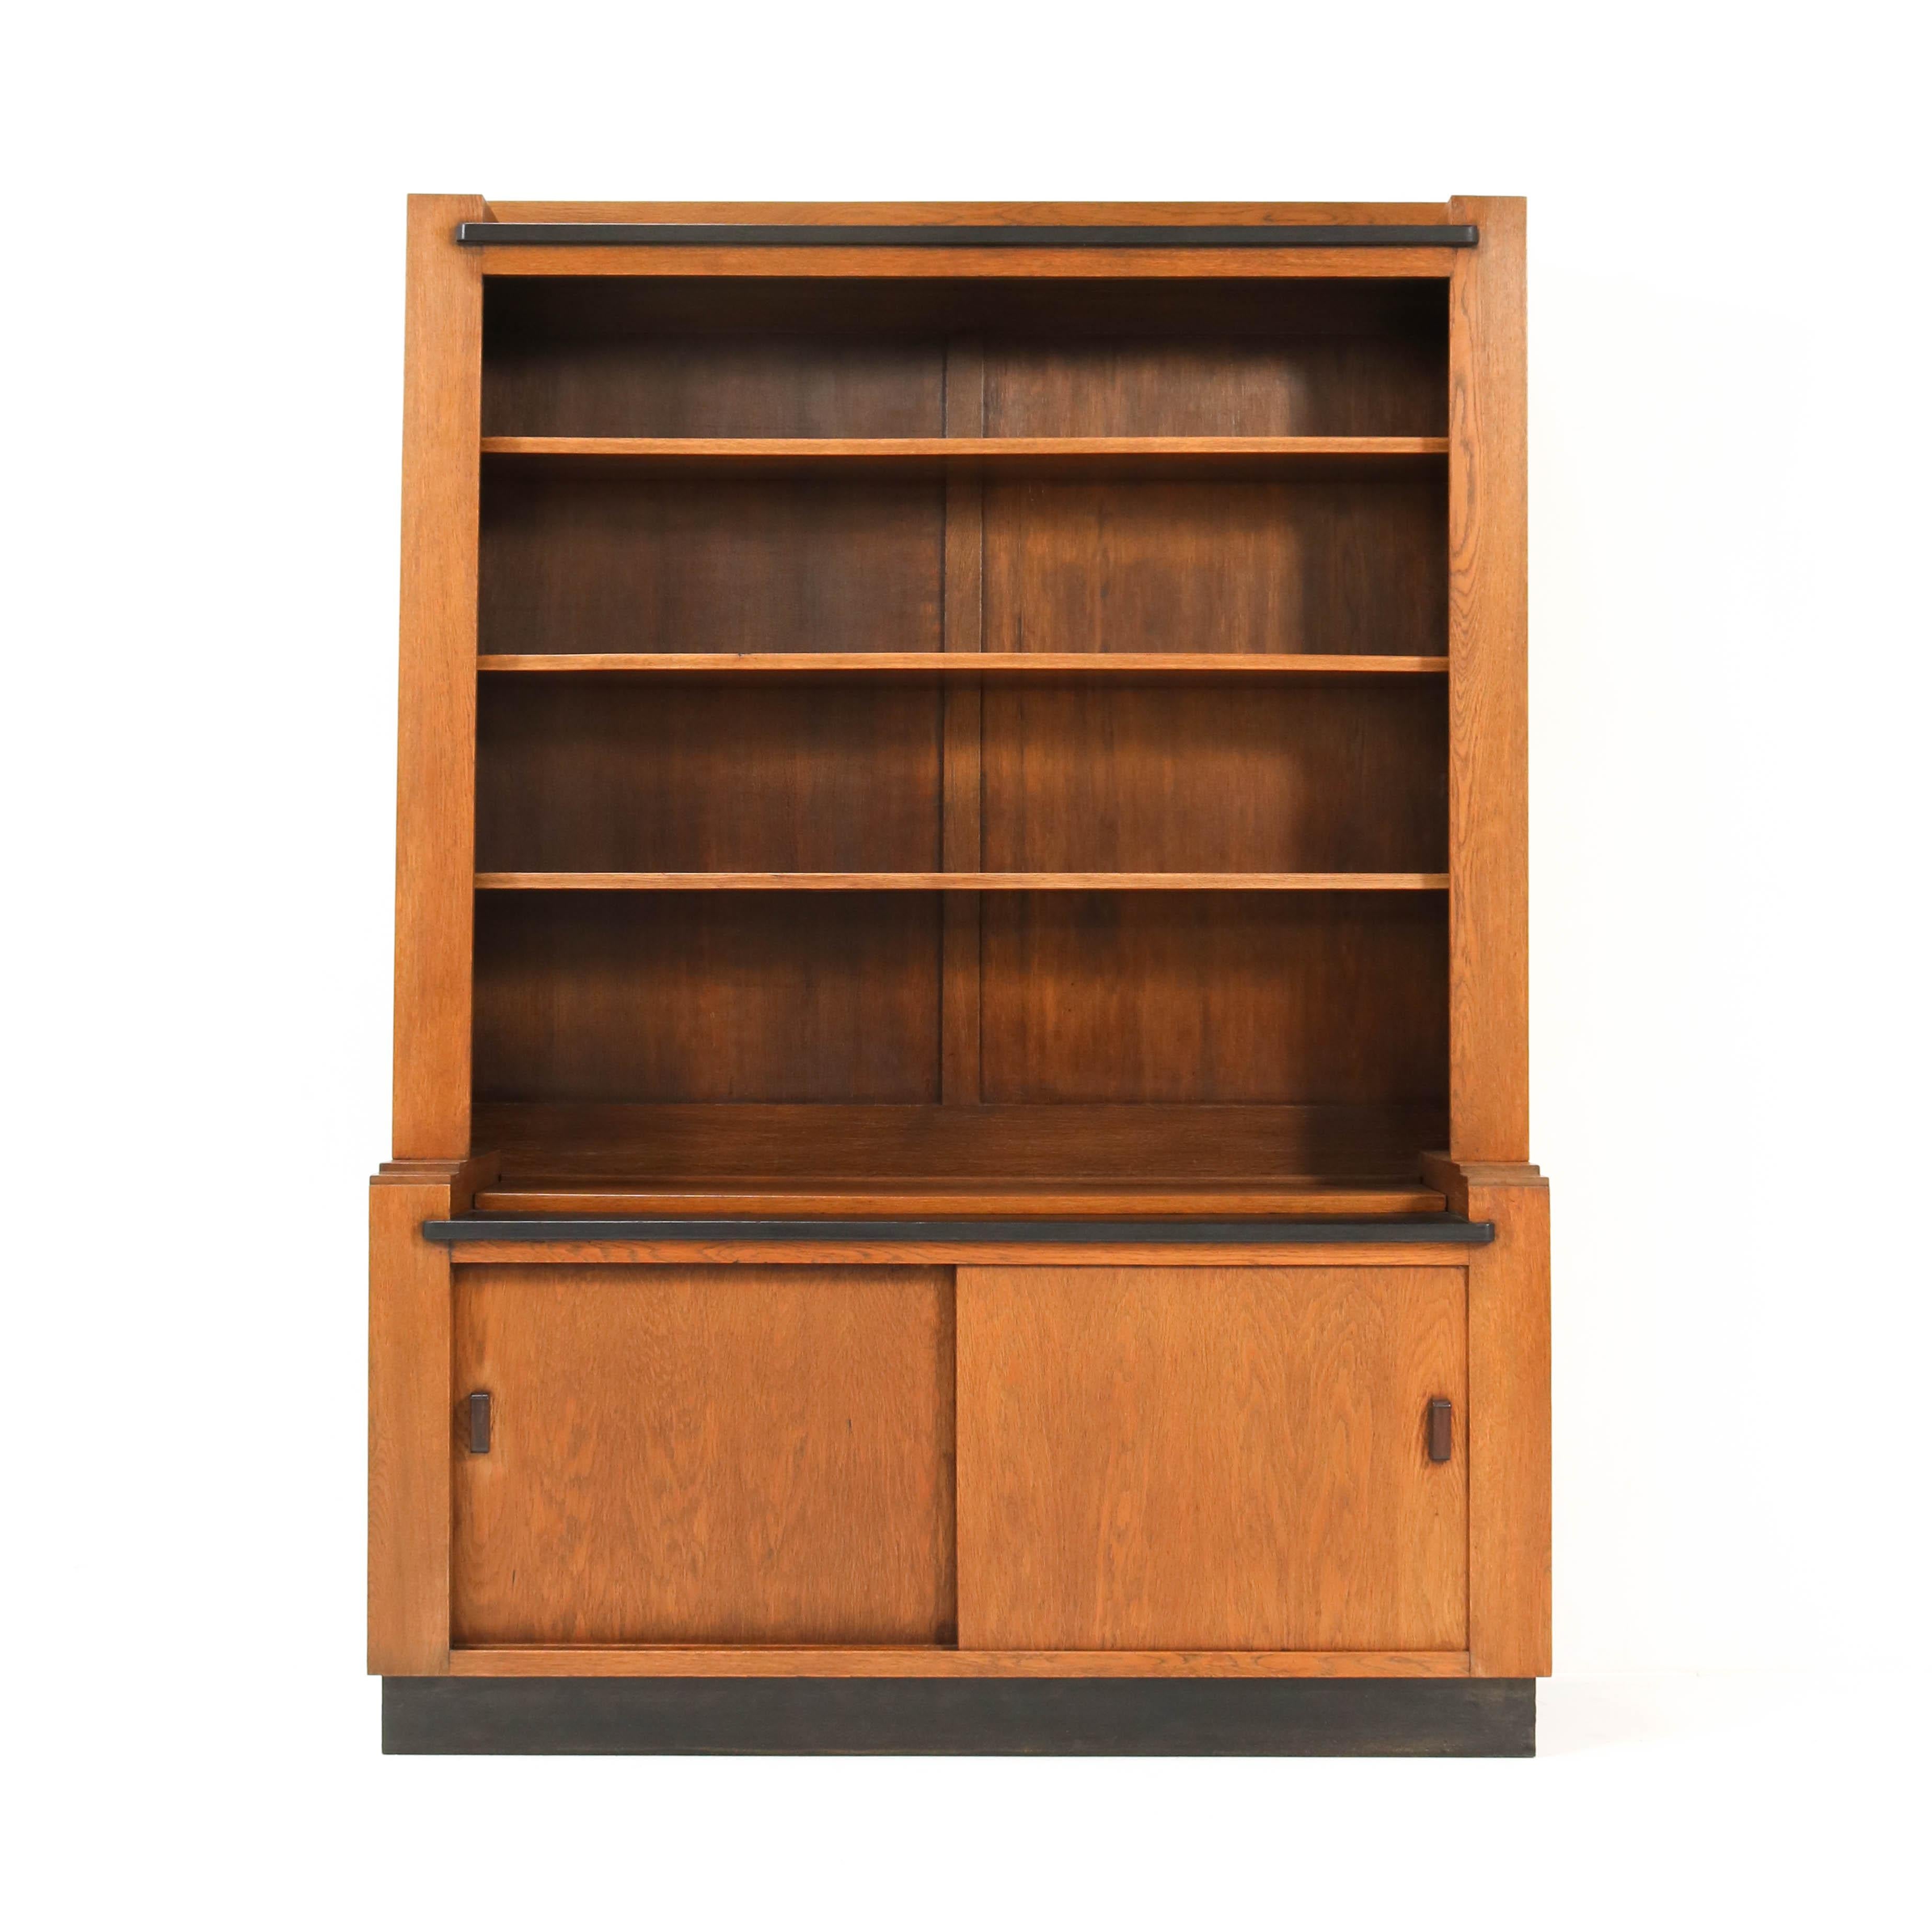 Magnificent and rare Art Deco Haagse School bookcase.
Design by Cor Alons for L.O.V. Oosterbeek.
Striking Dutch design from the 1920s.
Solid oak with original Macassar ebony handles.
Original lacquered black lining.
Three original solid oak